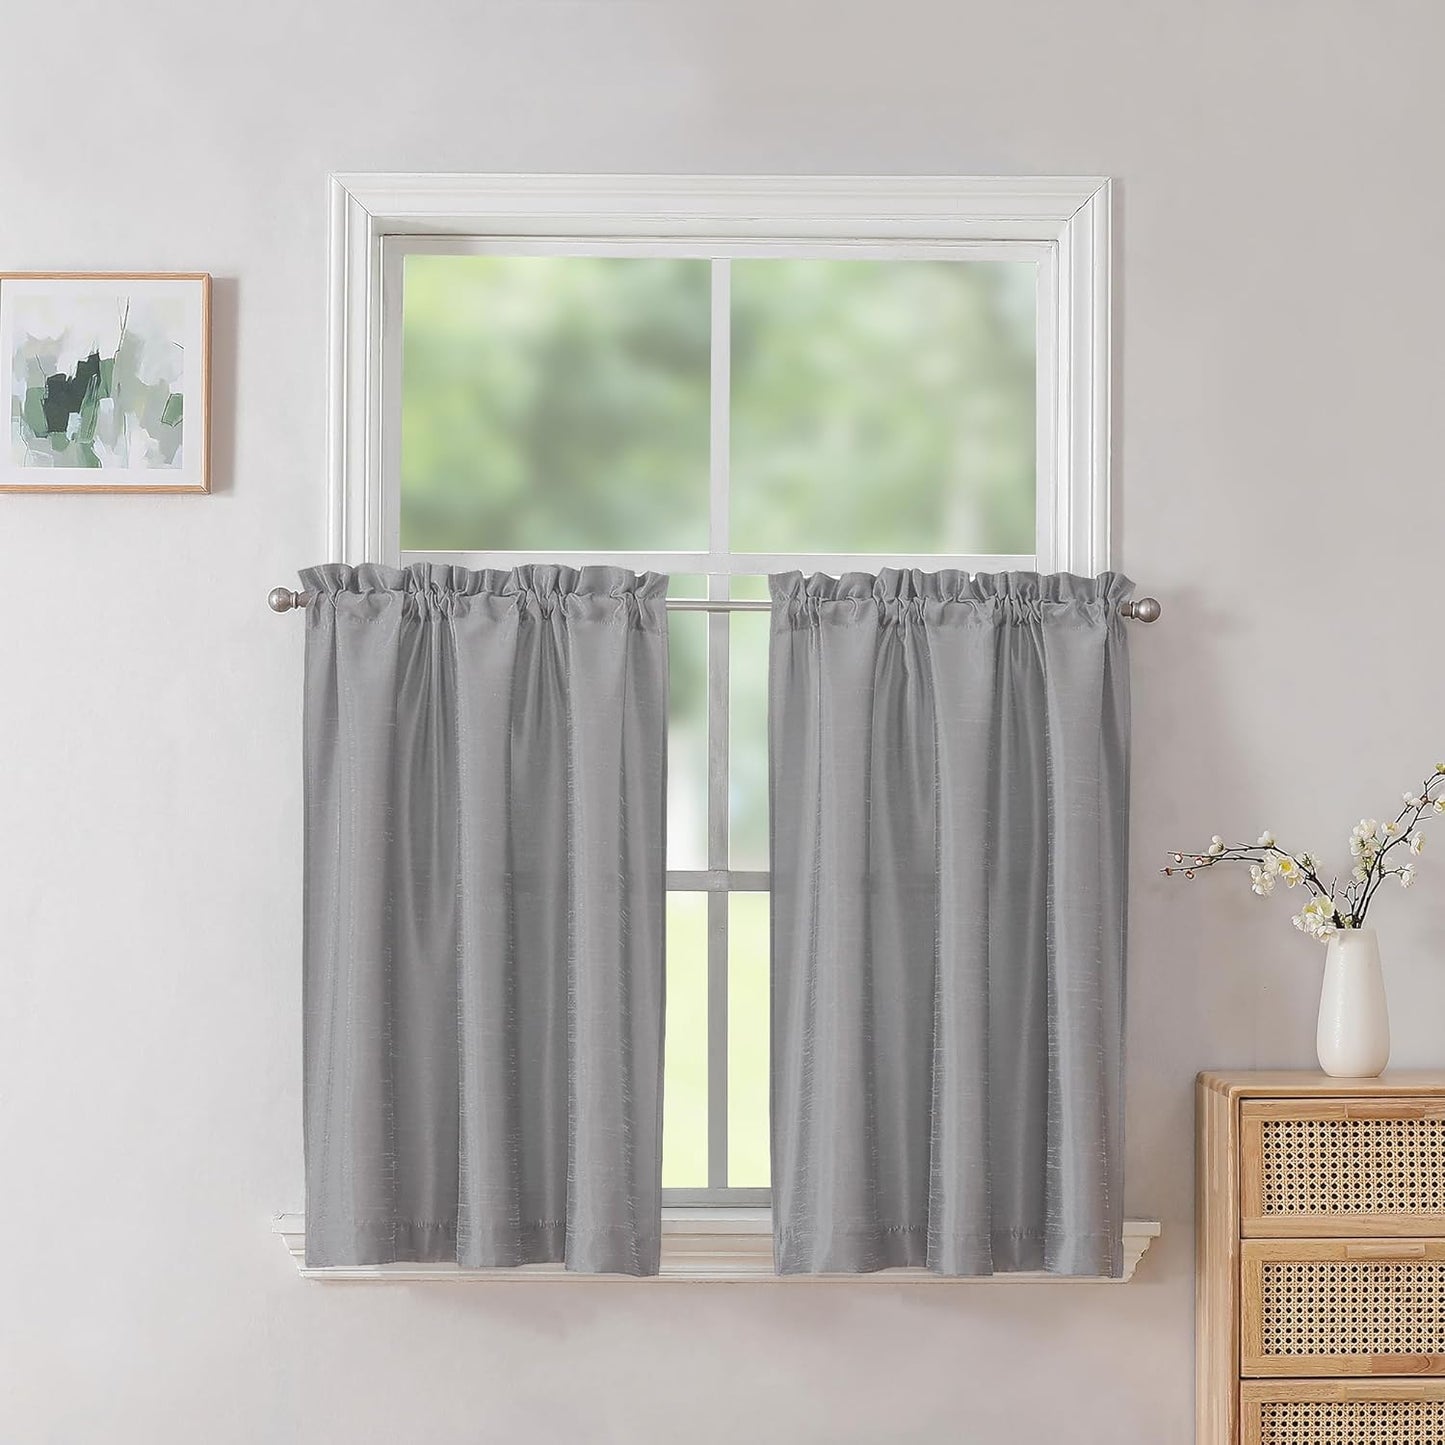 Chyhomenyc Uptown Sage Green Kitchen Curtains 45 Inch Length 2 Panels, Room Darkening Faux Silk Chic Fabric Short Window Curtains for Bedroom Living Room, Each 30Wx45L  Chyhomenyc Silver Gray 2X30"Wx24"L 